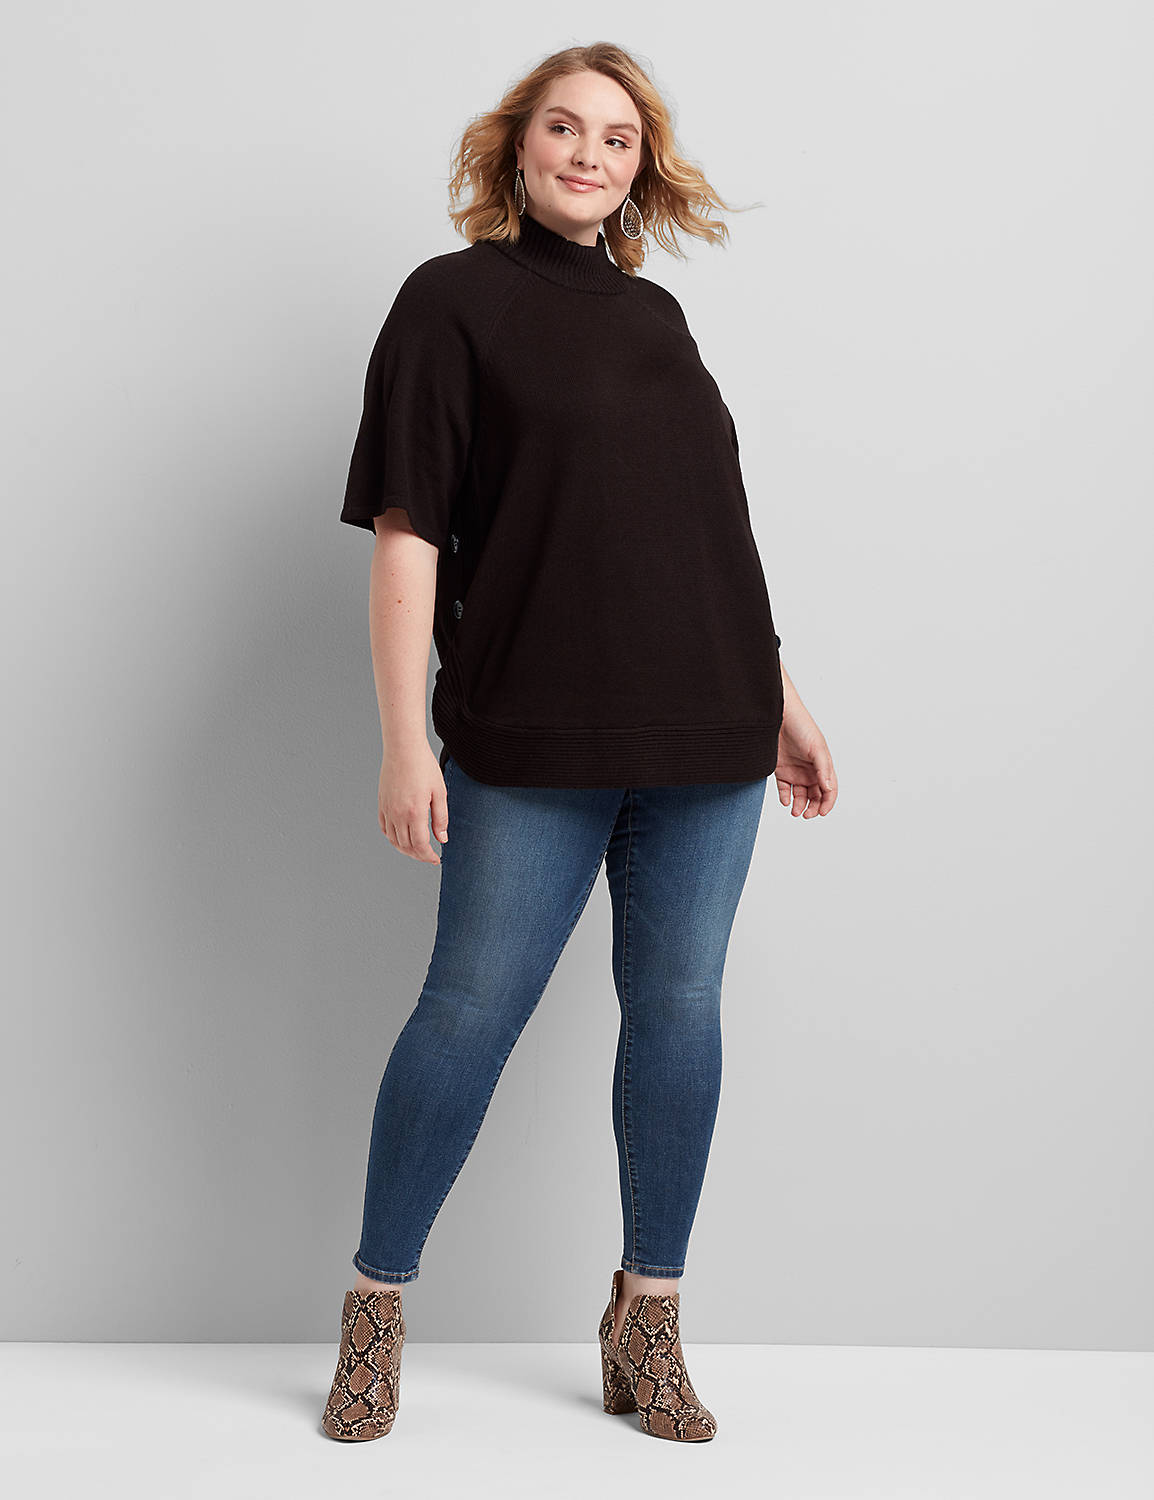 SHORT SLEEVE MOCK NECK BUTTON SIDE PONCHO 1113568:Pitch Black LB 1000322:22/24 Product Image 3